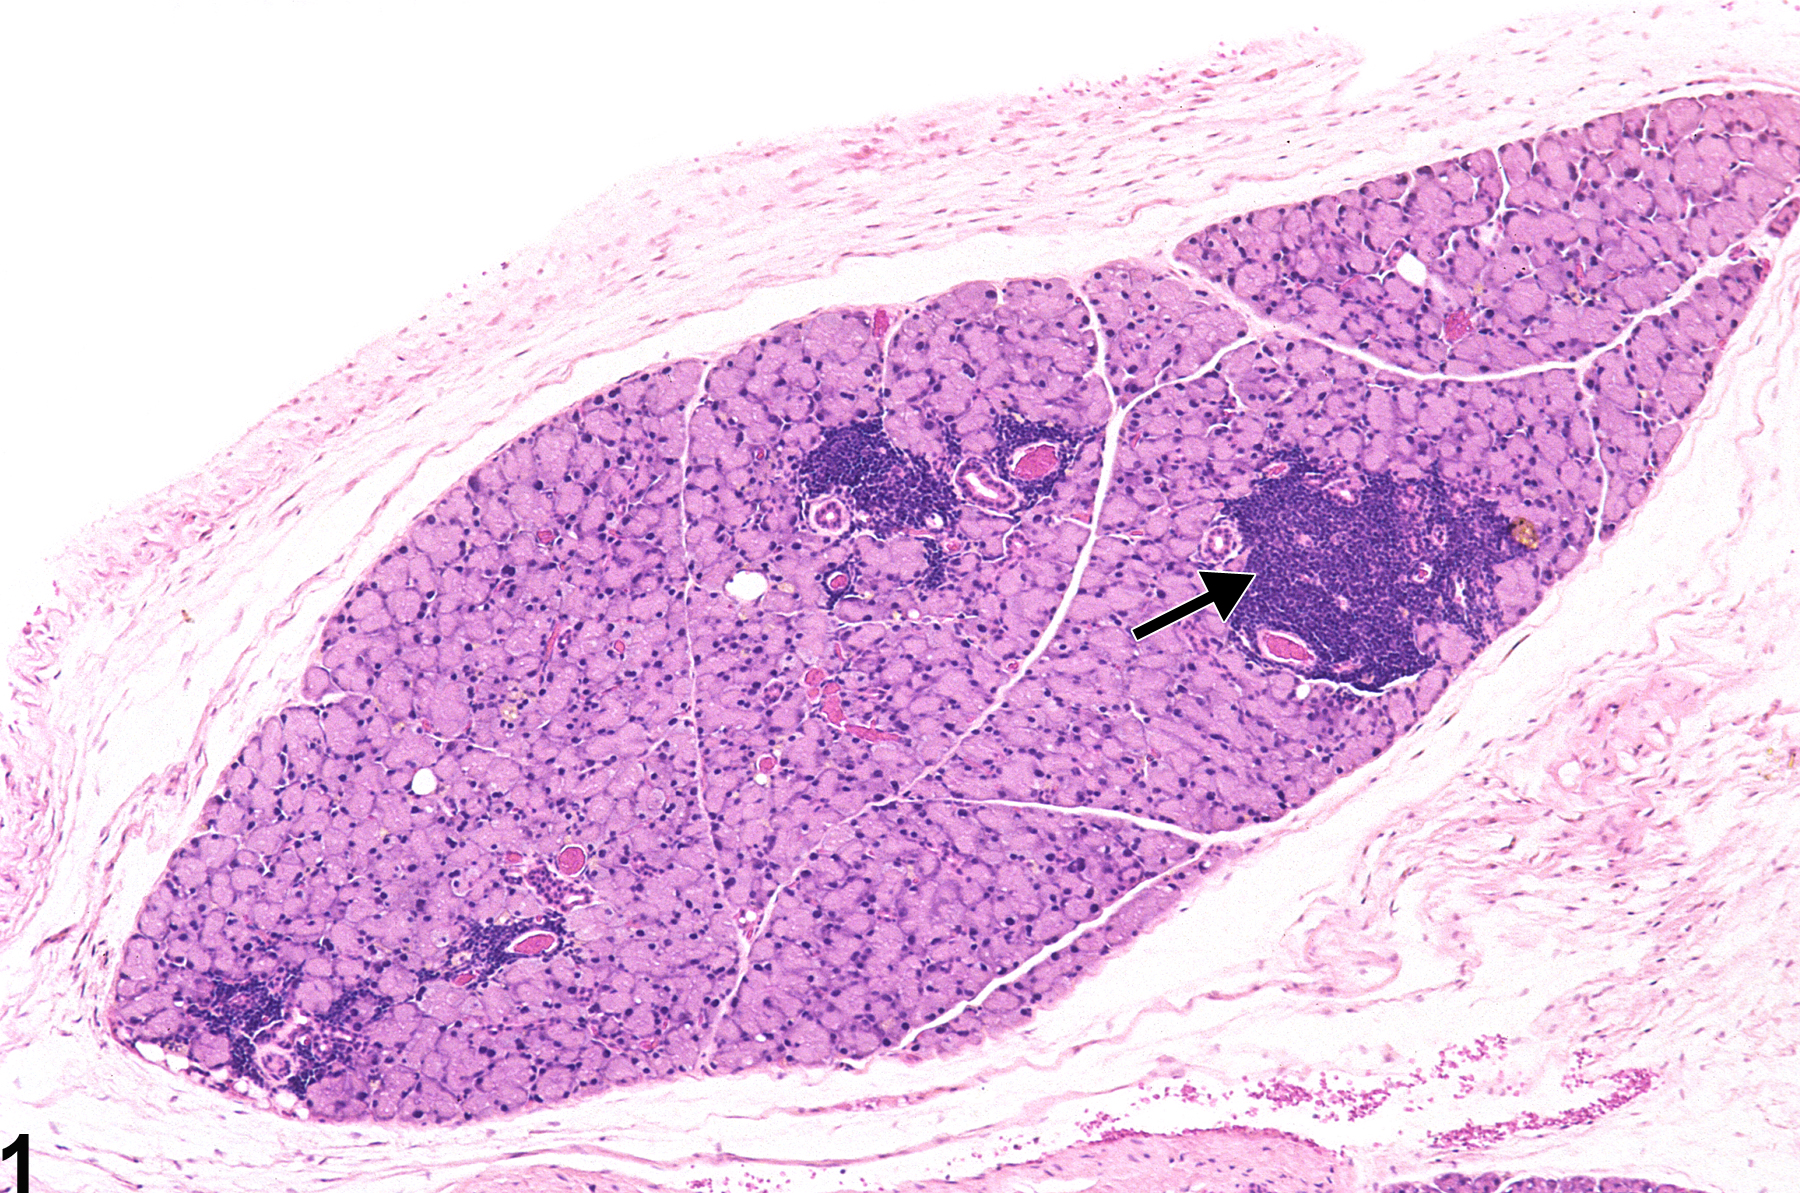 Image of infiltration cellular, mononuclear cell in the lacrimal gland from a male B6C3F1 mouse in a chronic study